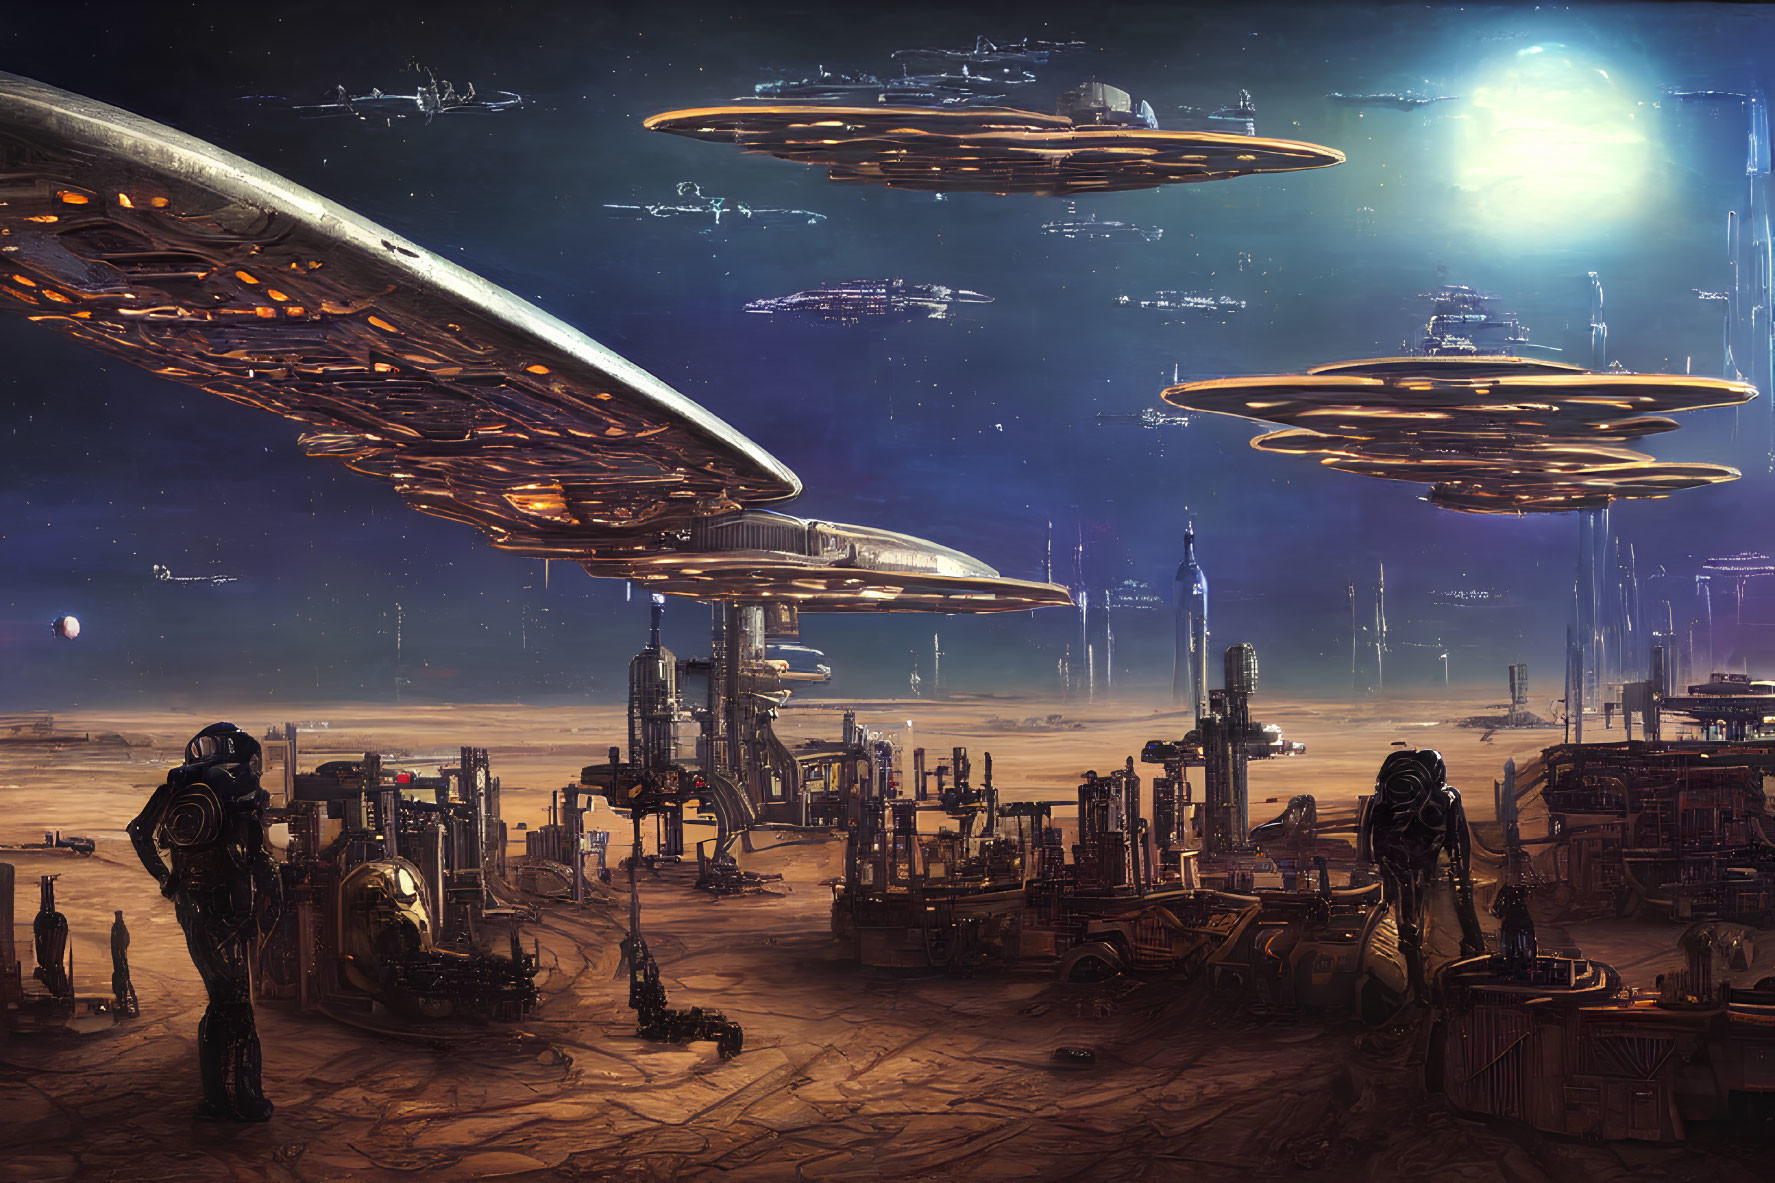 Futuristic Cityscape with Flying Saucers and Skyscrapers